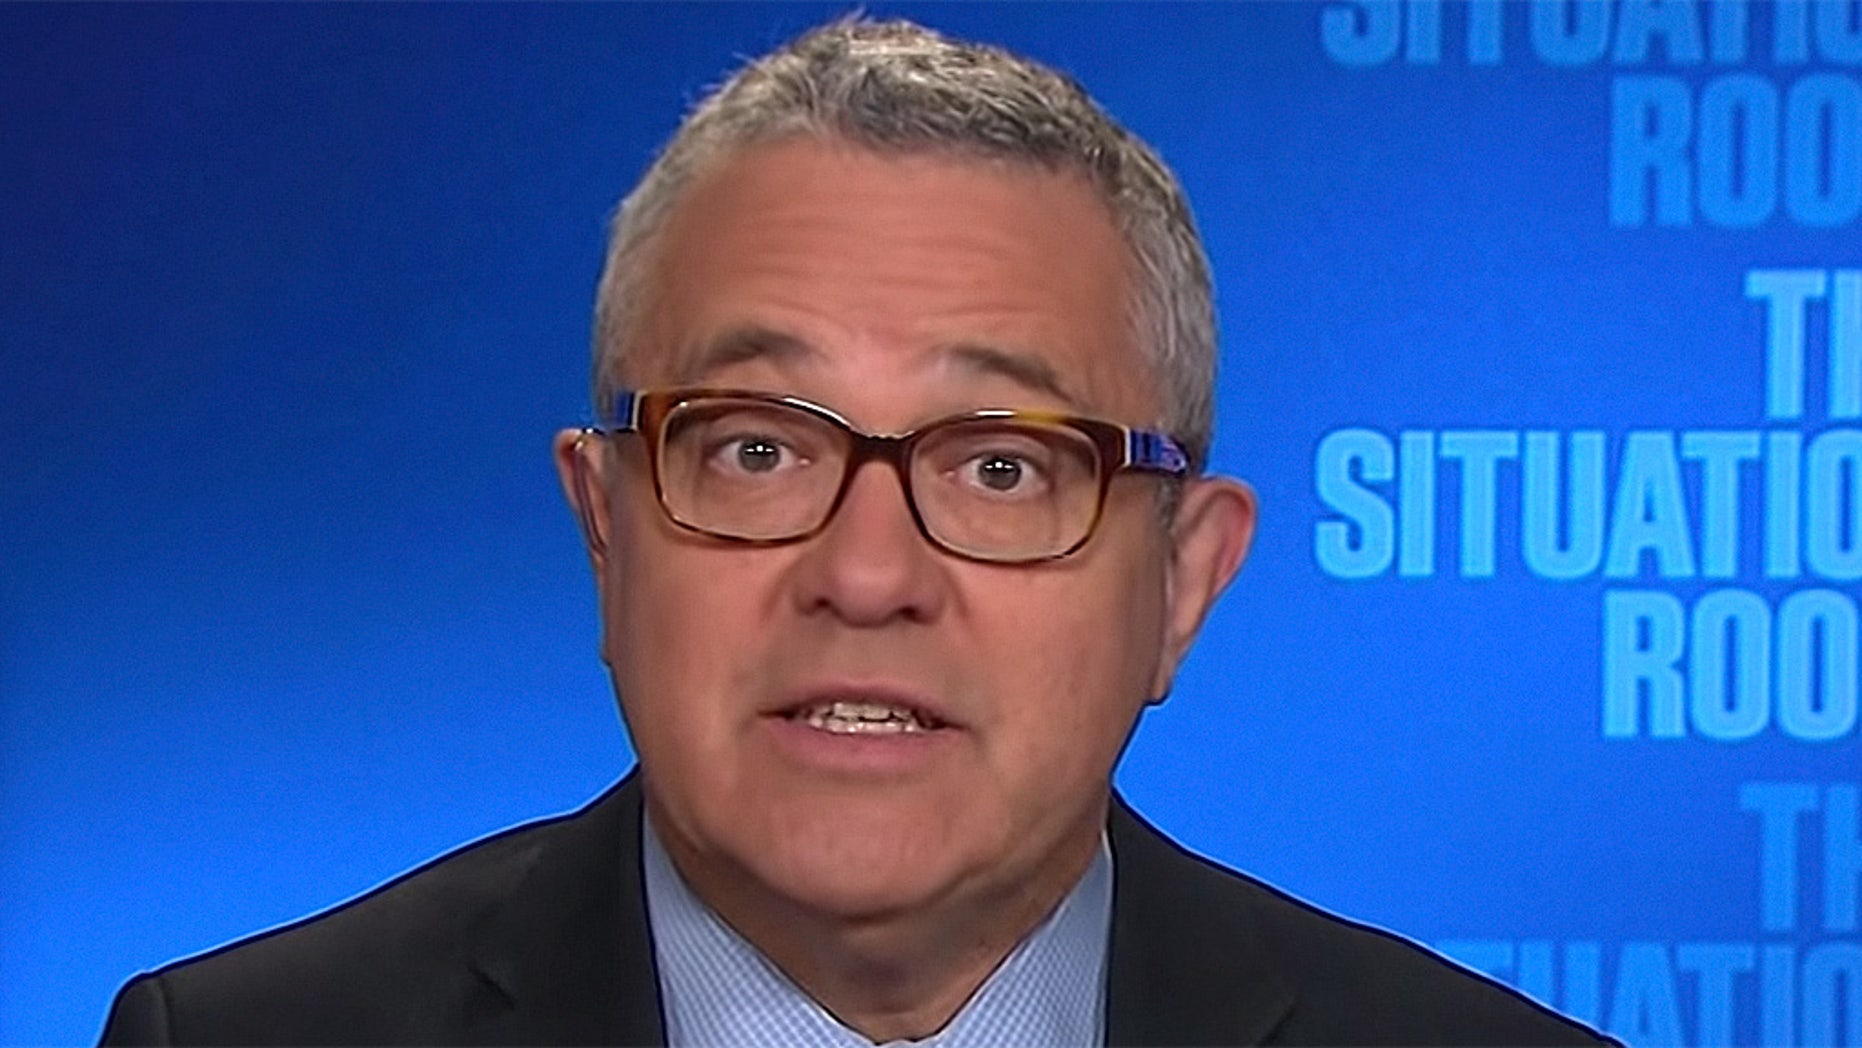 CNN legal analyst Jeffery Toobin said Democrats are “weak” and questioned if they have “the guts to do anything” to oppose Republican hopes to quickly fill the Supreme Court vacancy.